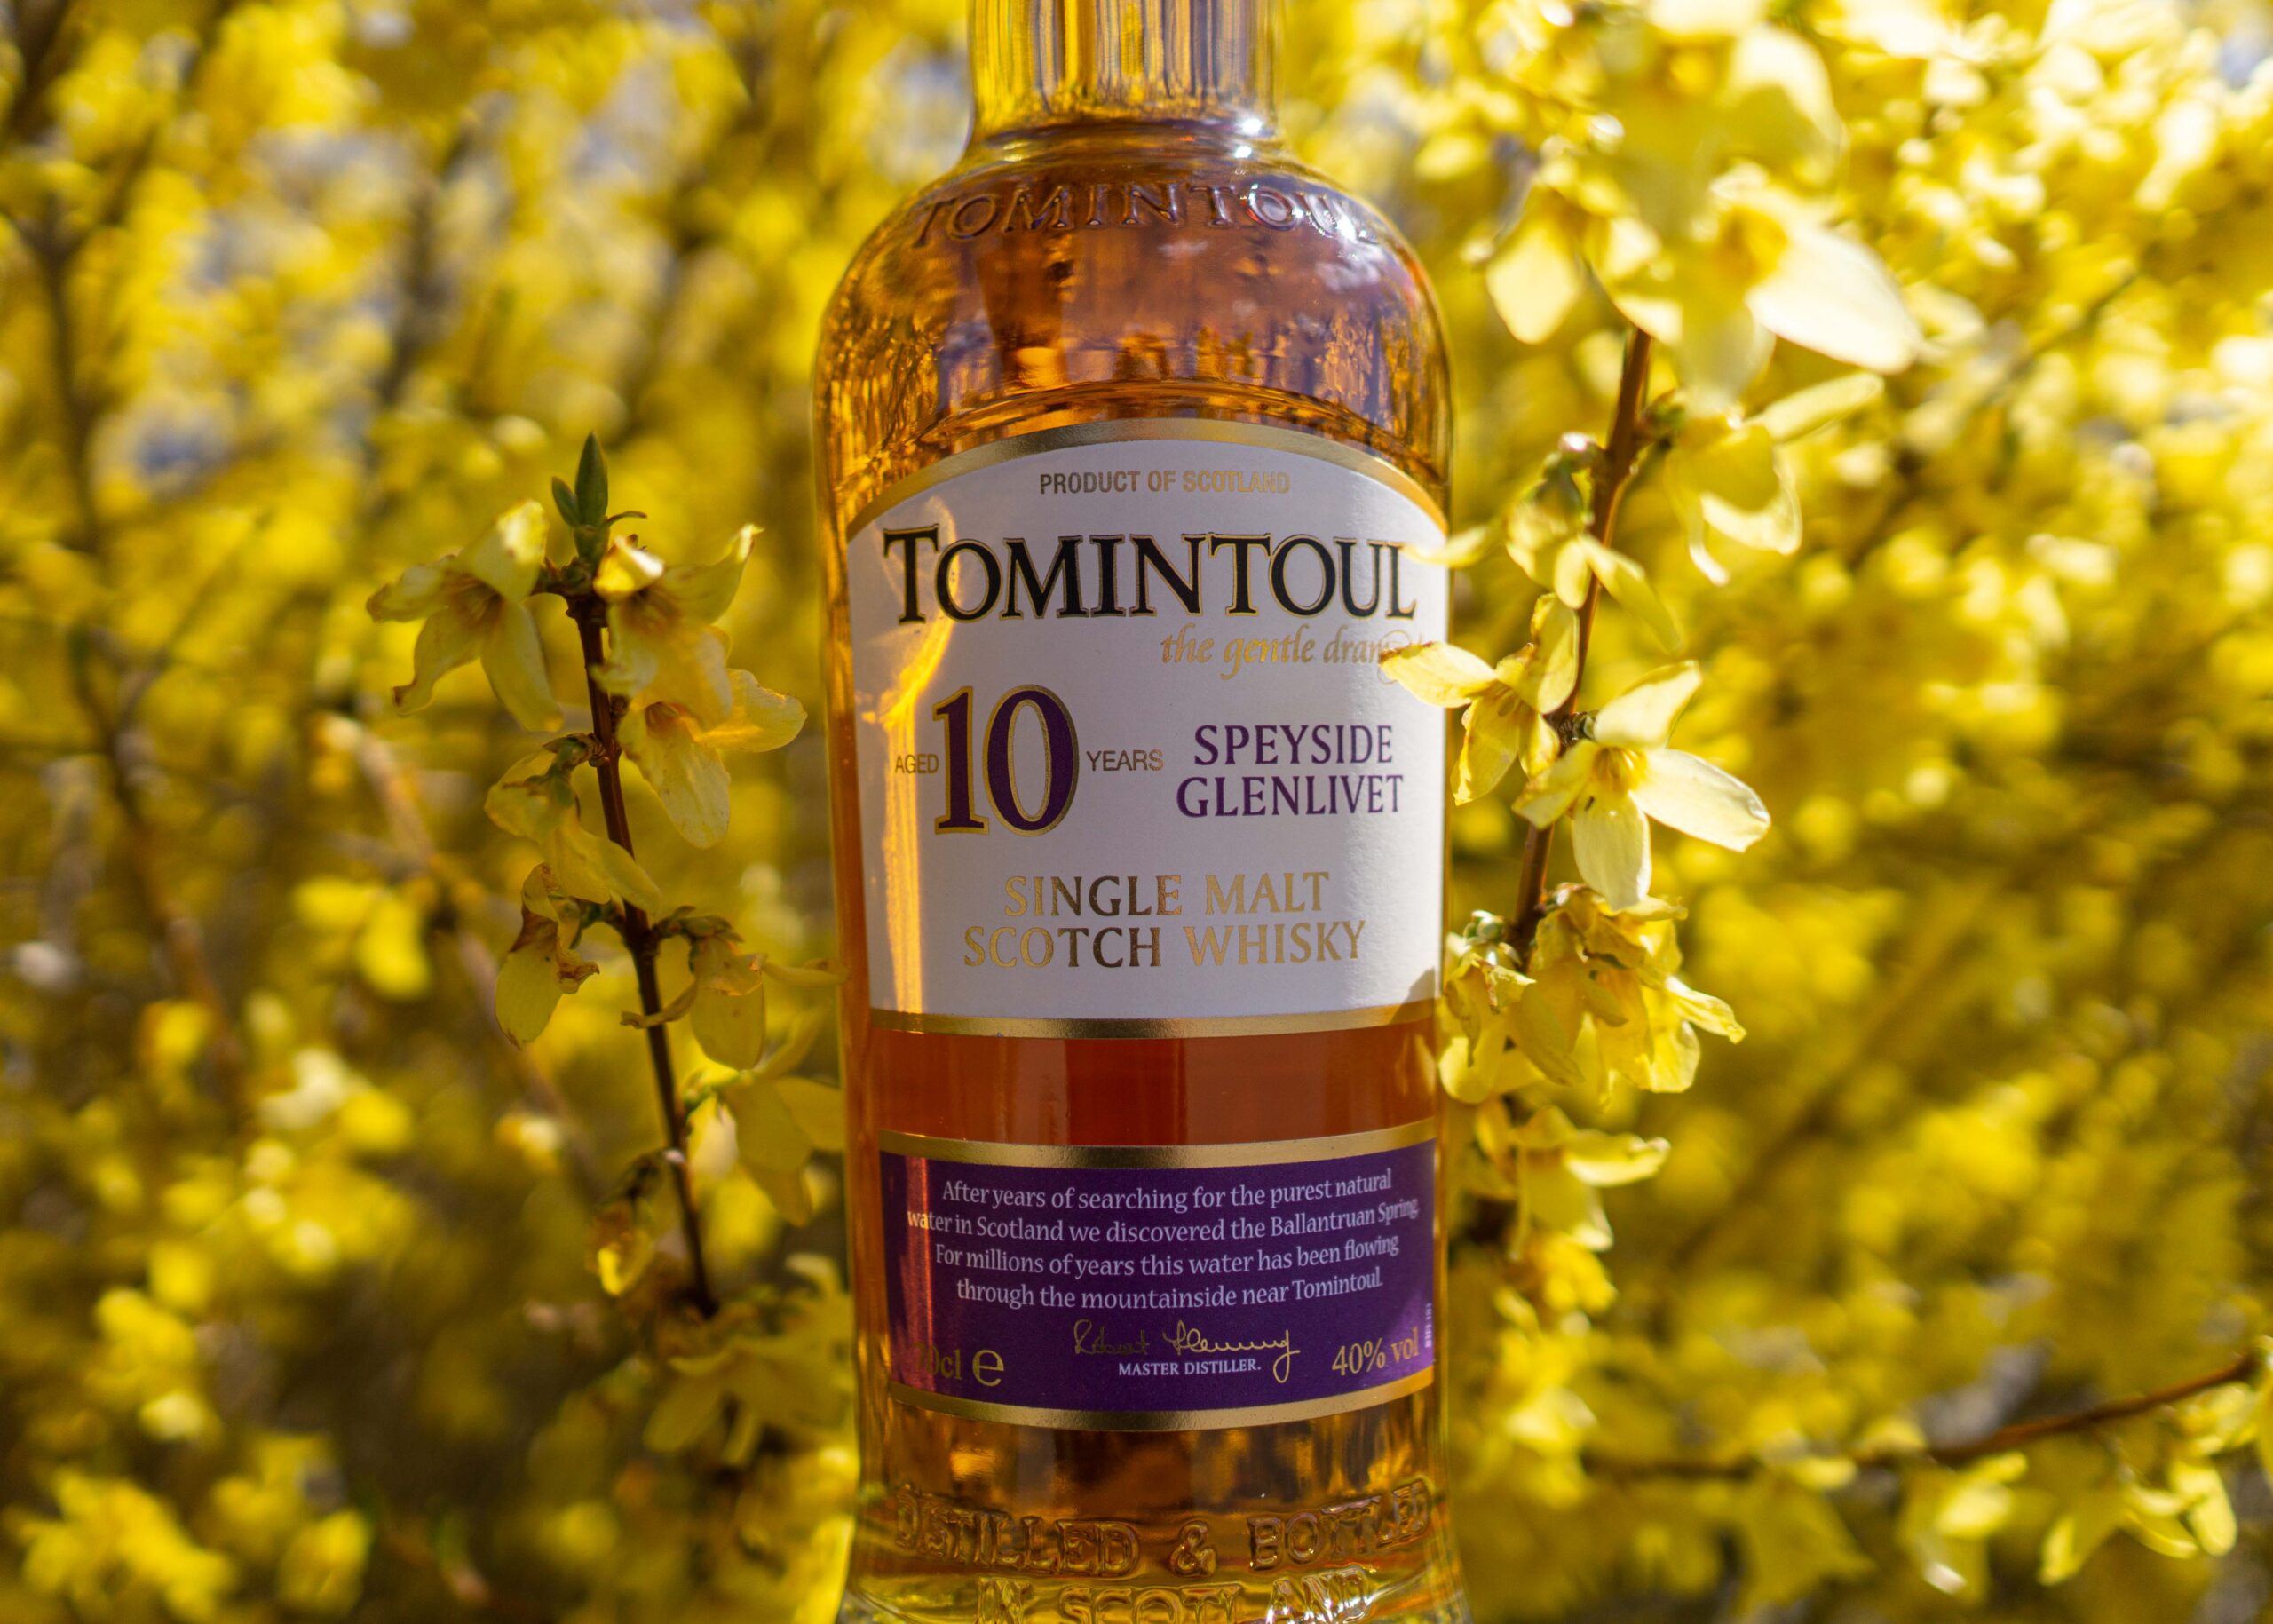 Tomintoul 10